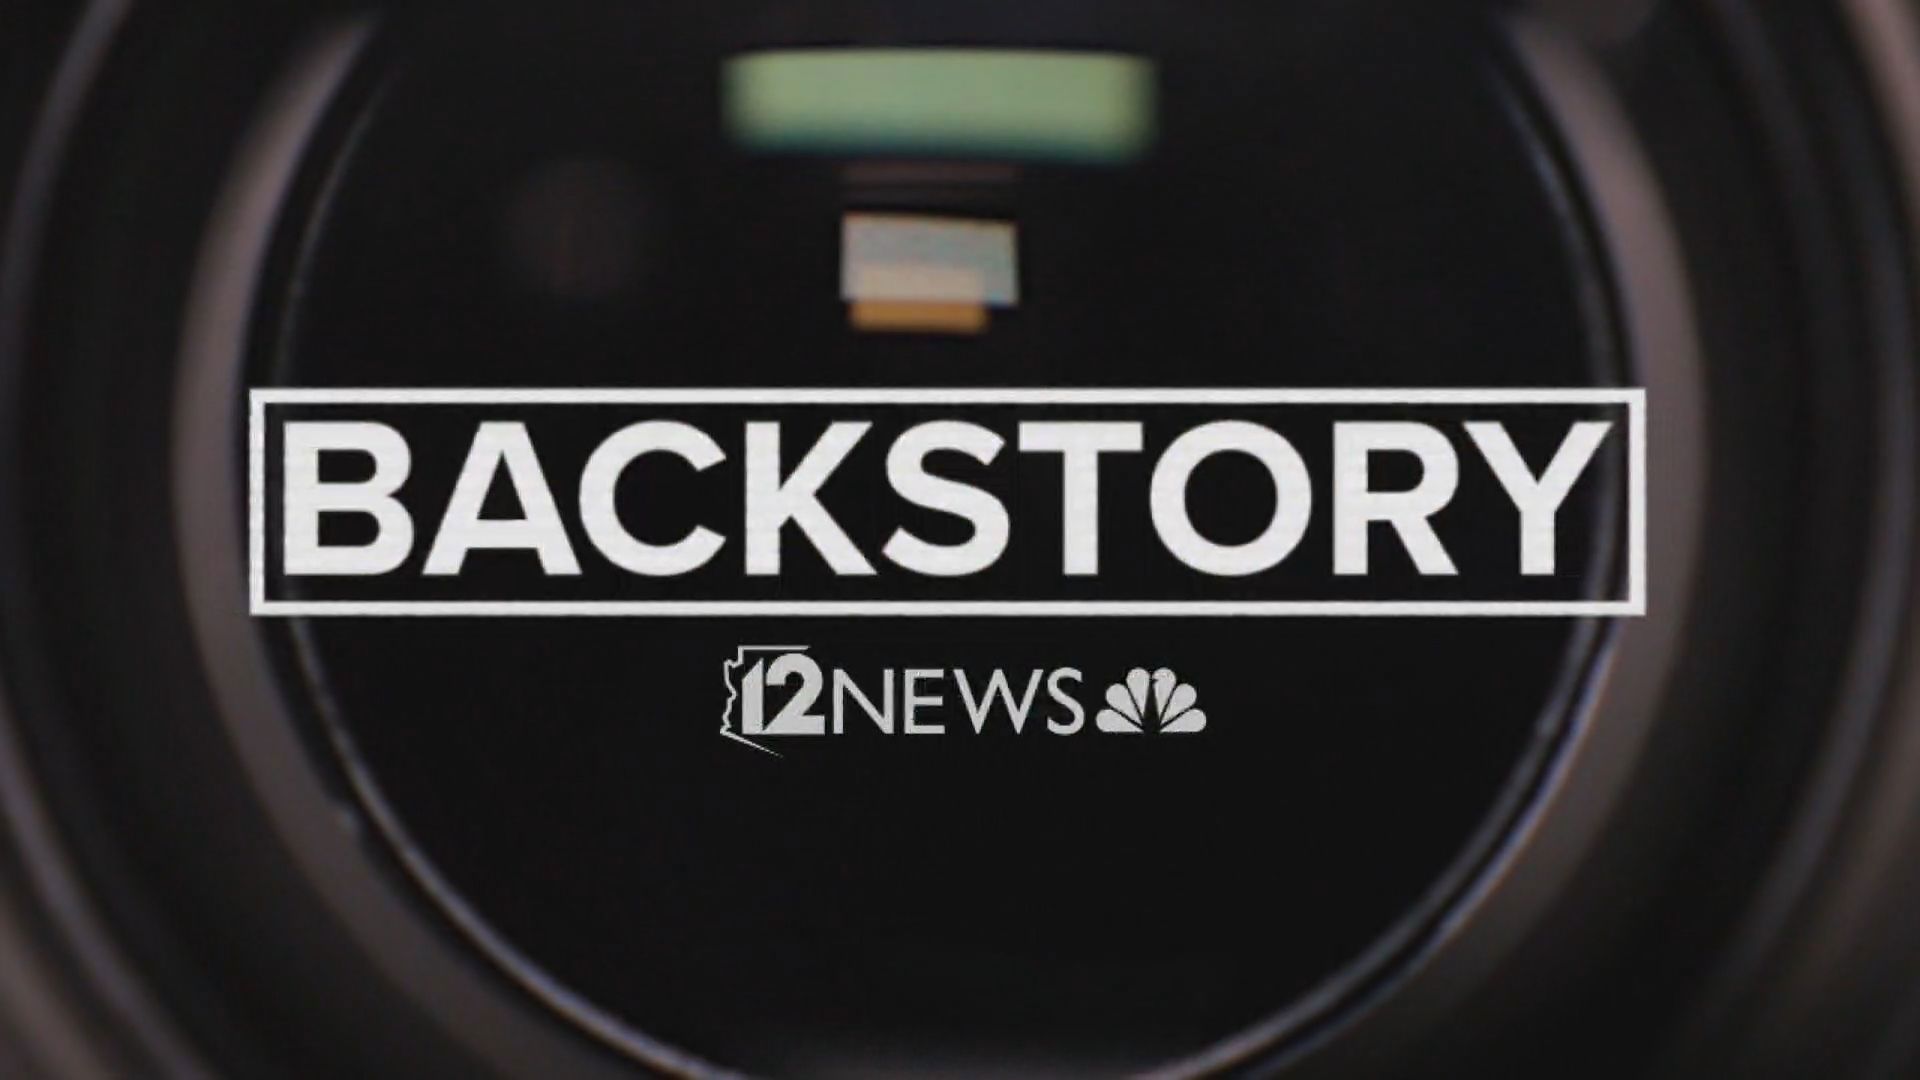 In our Backstory series, we take a deeper look into covering some of the current stories and the processes journalists encounter during their reporting.